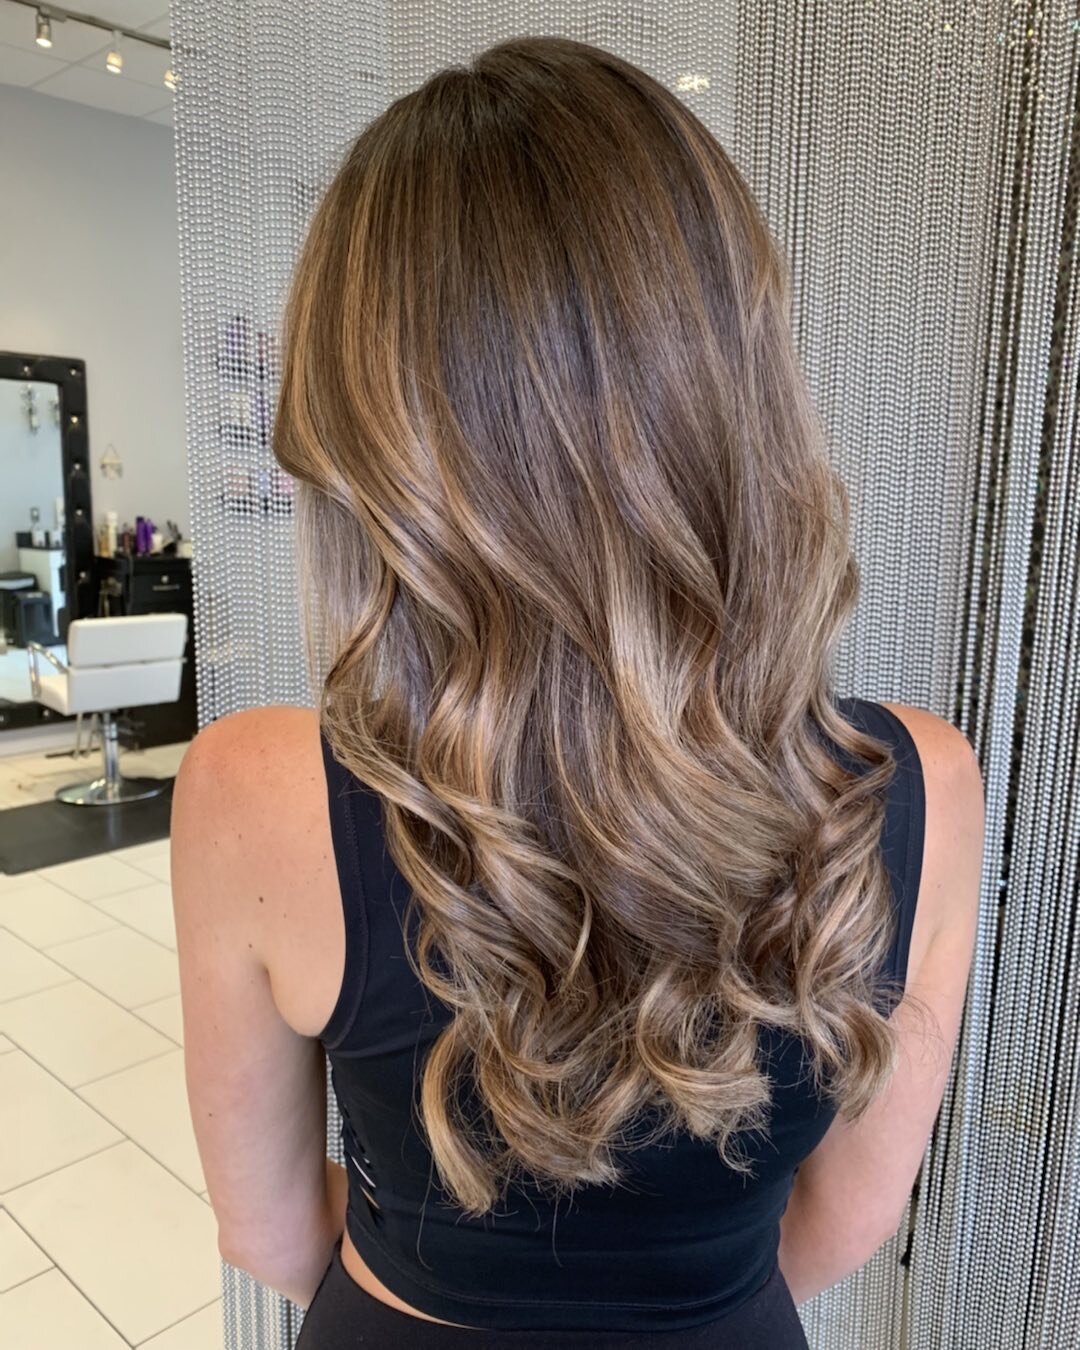 Some hand painting for a brighter look✨ by Taryn. @tee_quiles_hair #balayage #carmelhighlights #njsalon #njstylist #marlboronj #freeholdnj #coltsnecknj